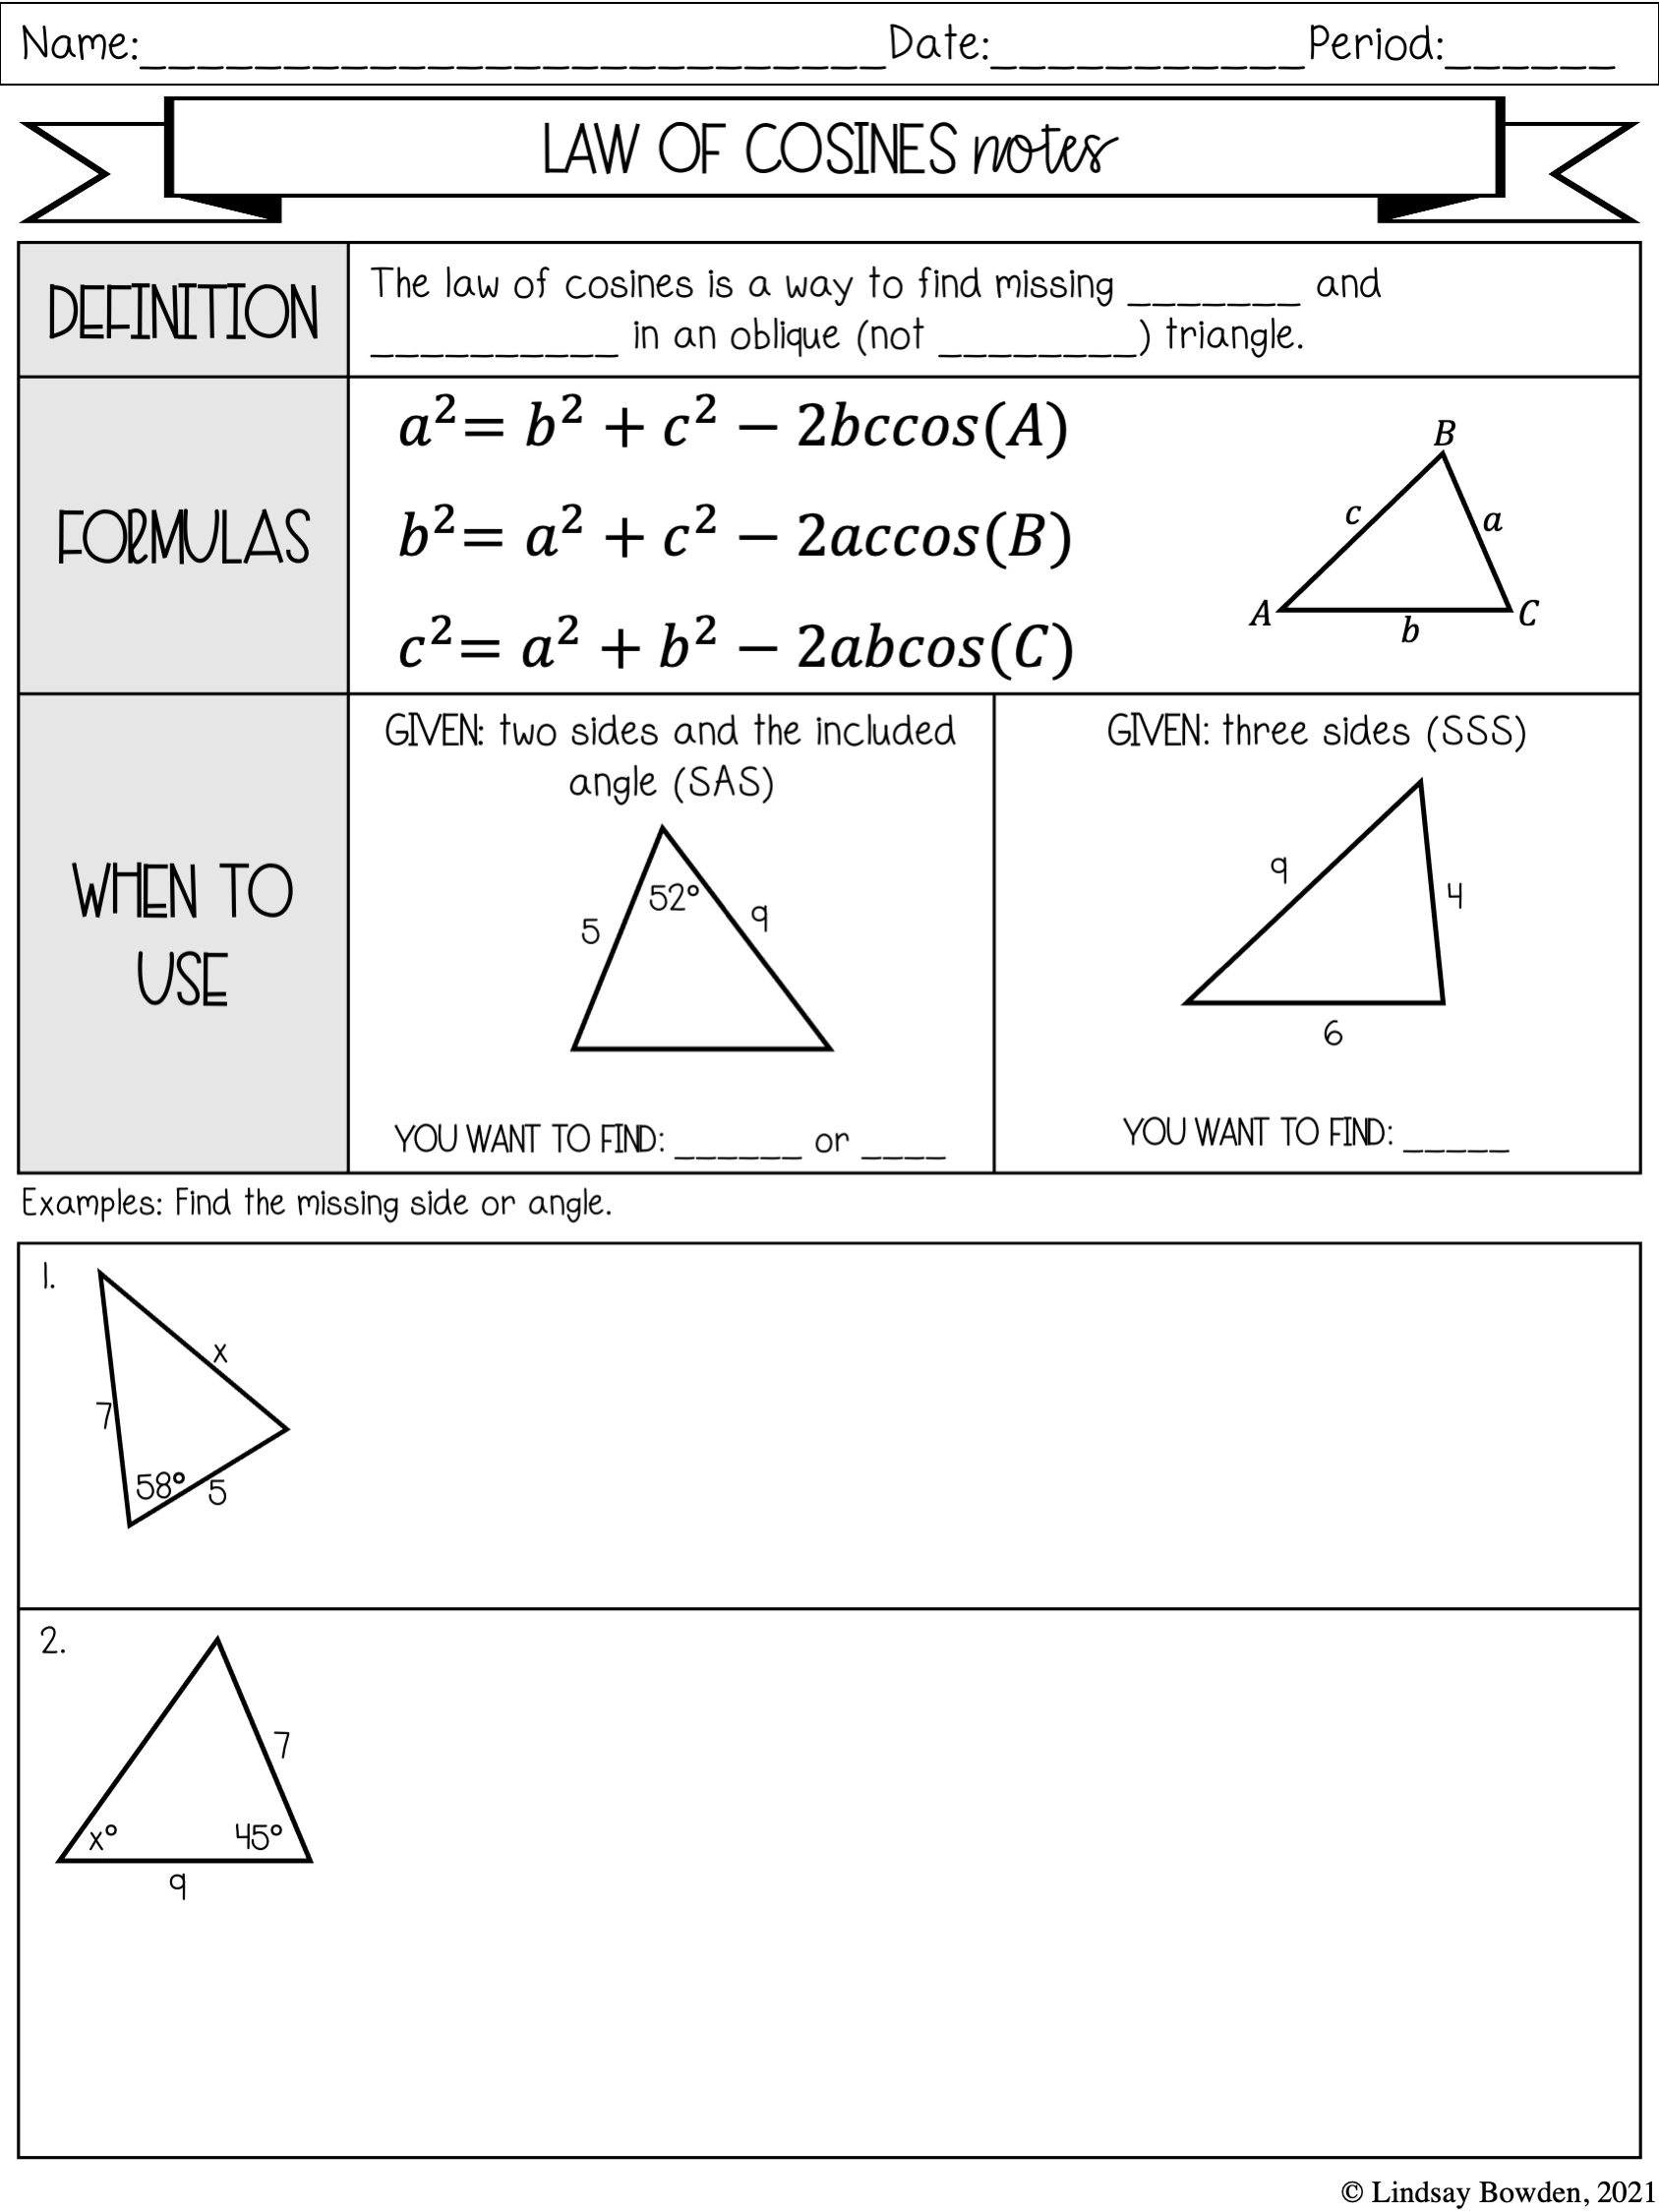 Law of Sines and Cosines Notes and Worksheets - Lindsay Bowden For Law Of Cosines Worksheet